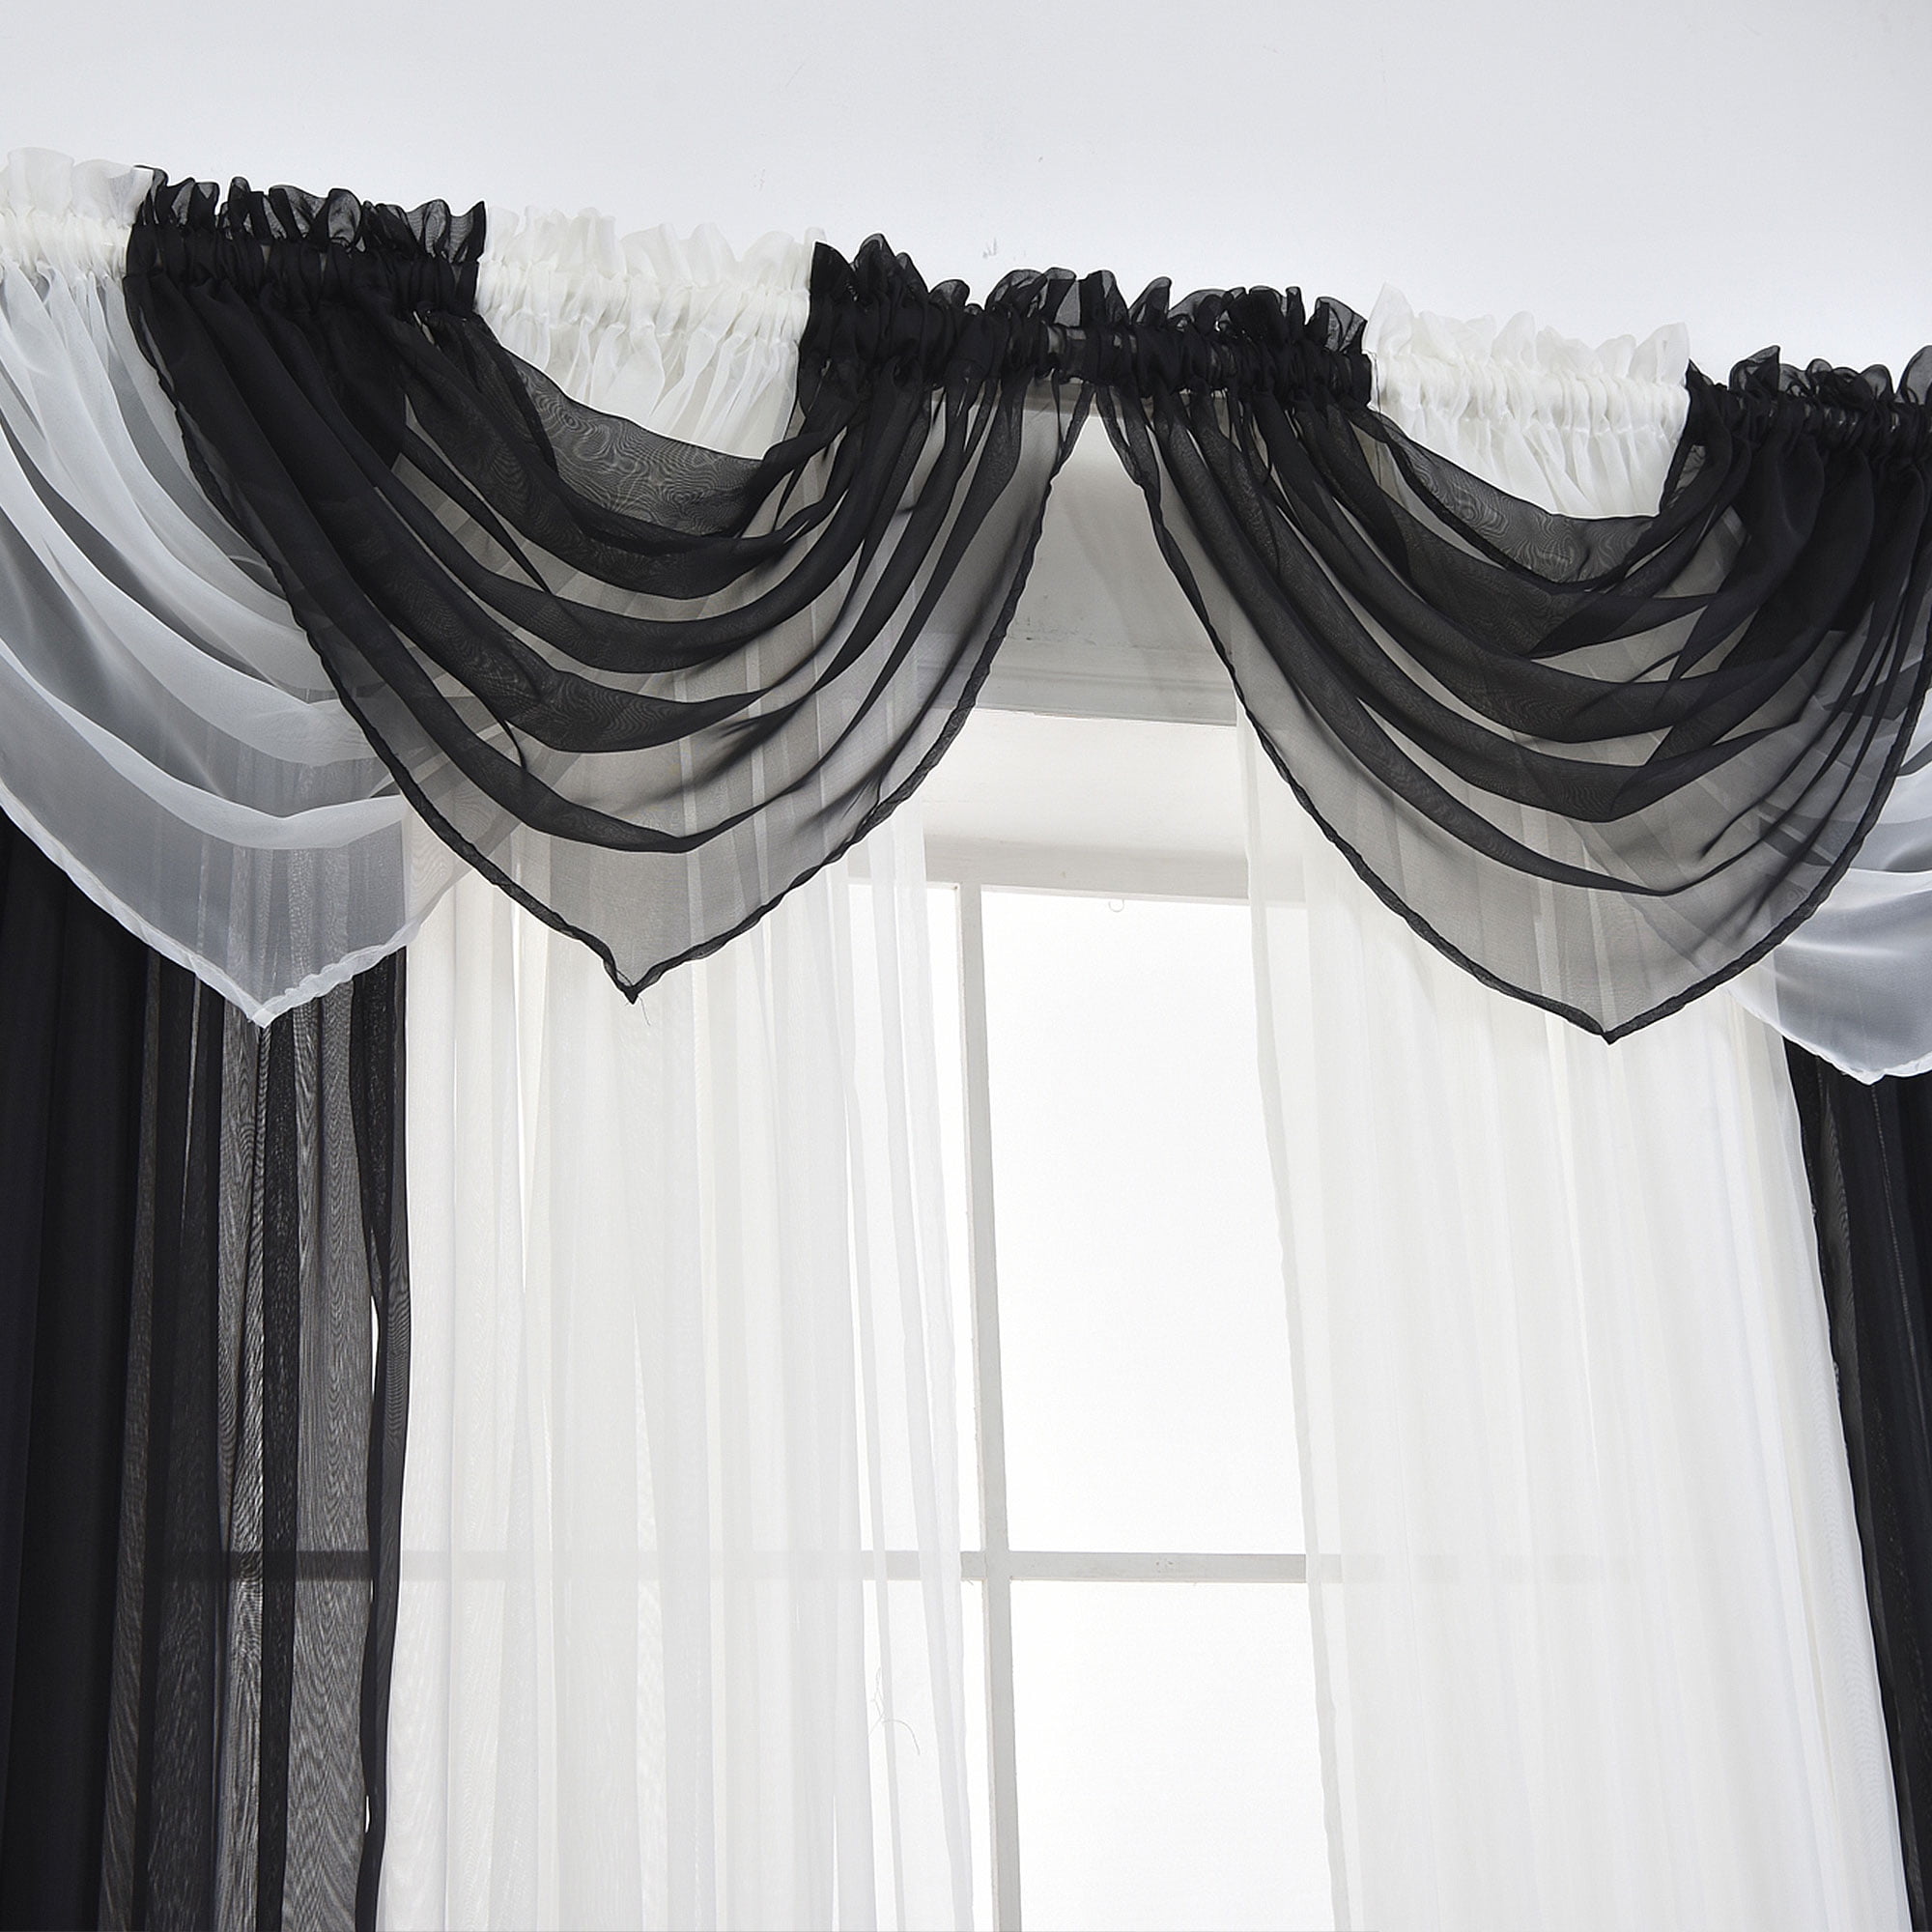 New Voile Net Curtains Ready Made with Swags Pelmet Valance Brown Black Red 